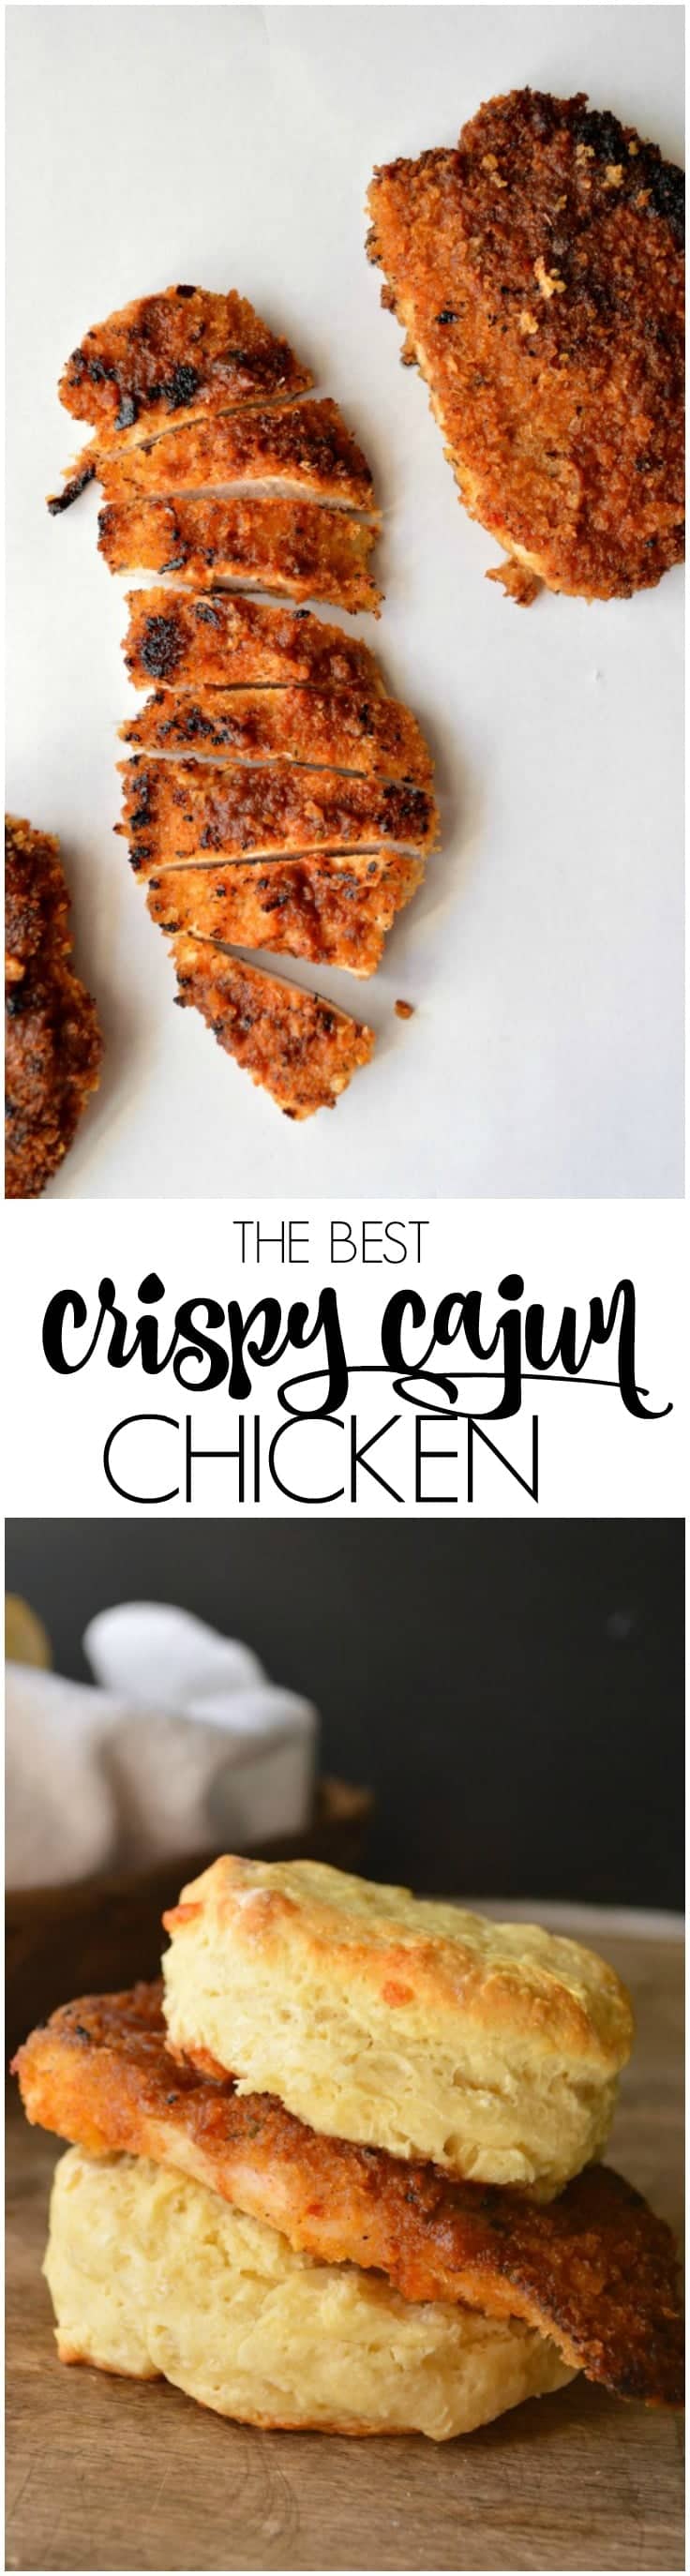 Whether you want to make a CopyCat Cajun Filet Biscuit or just have a really great salad, this easy recipe for The Best Crispy Cajun Chicken will not disappoint!